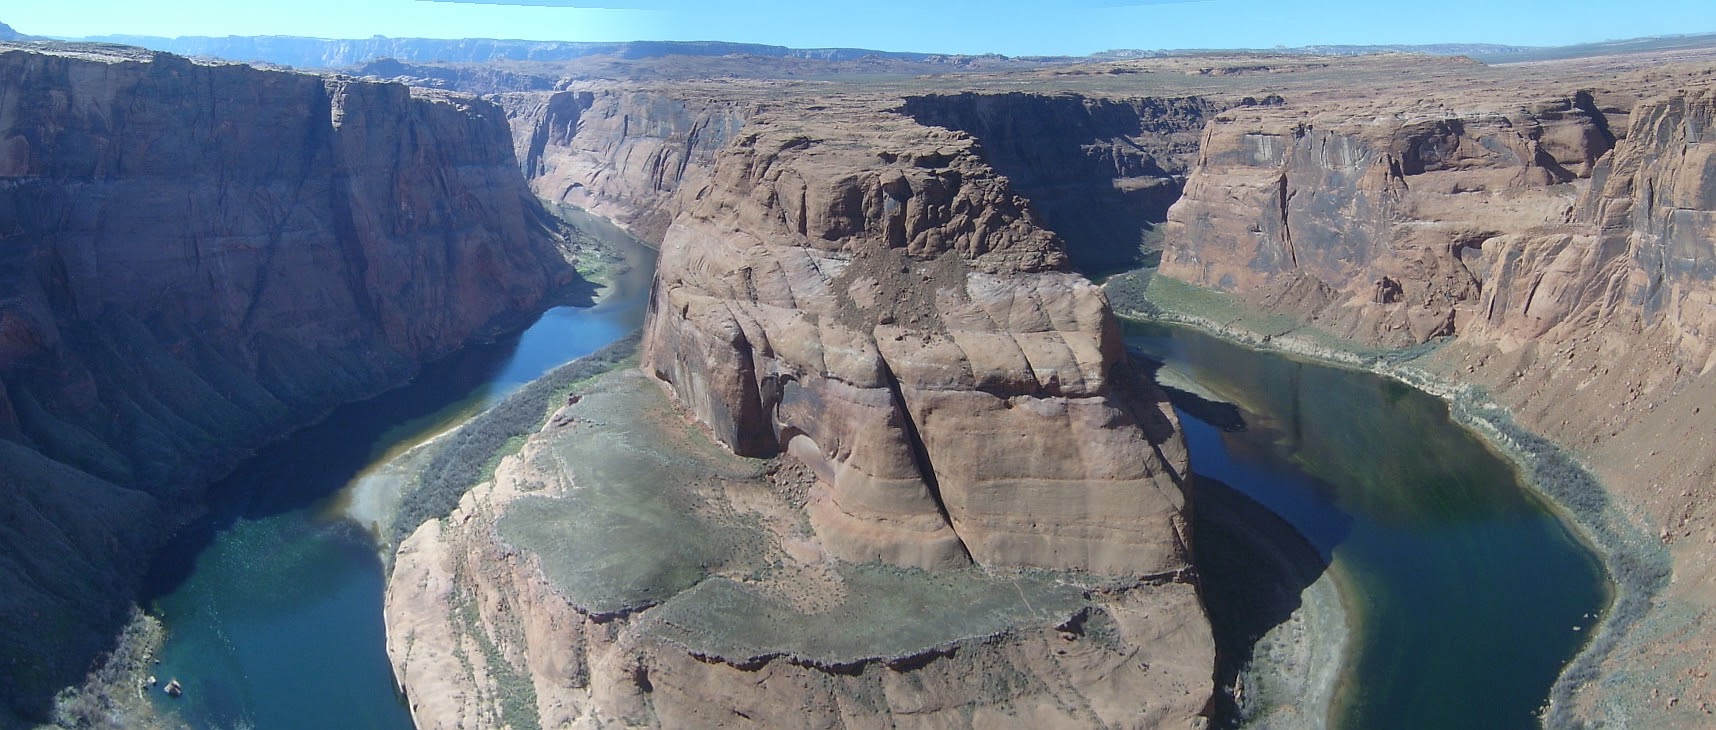 Entrenched meander of the Colorado River, downstream of Page, Arizona. High cliffs, that lead down to a river with narrow shores.